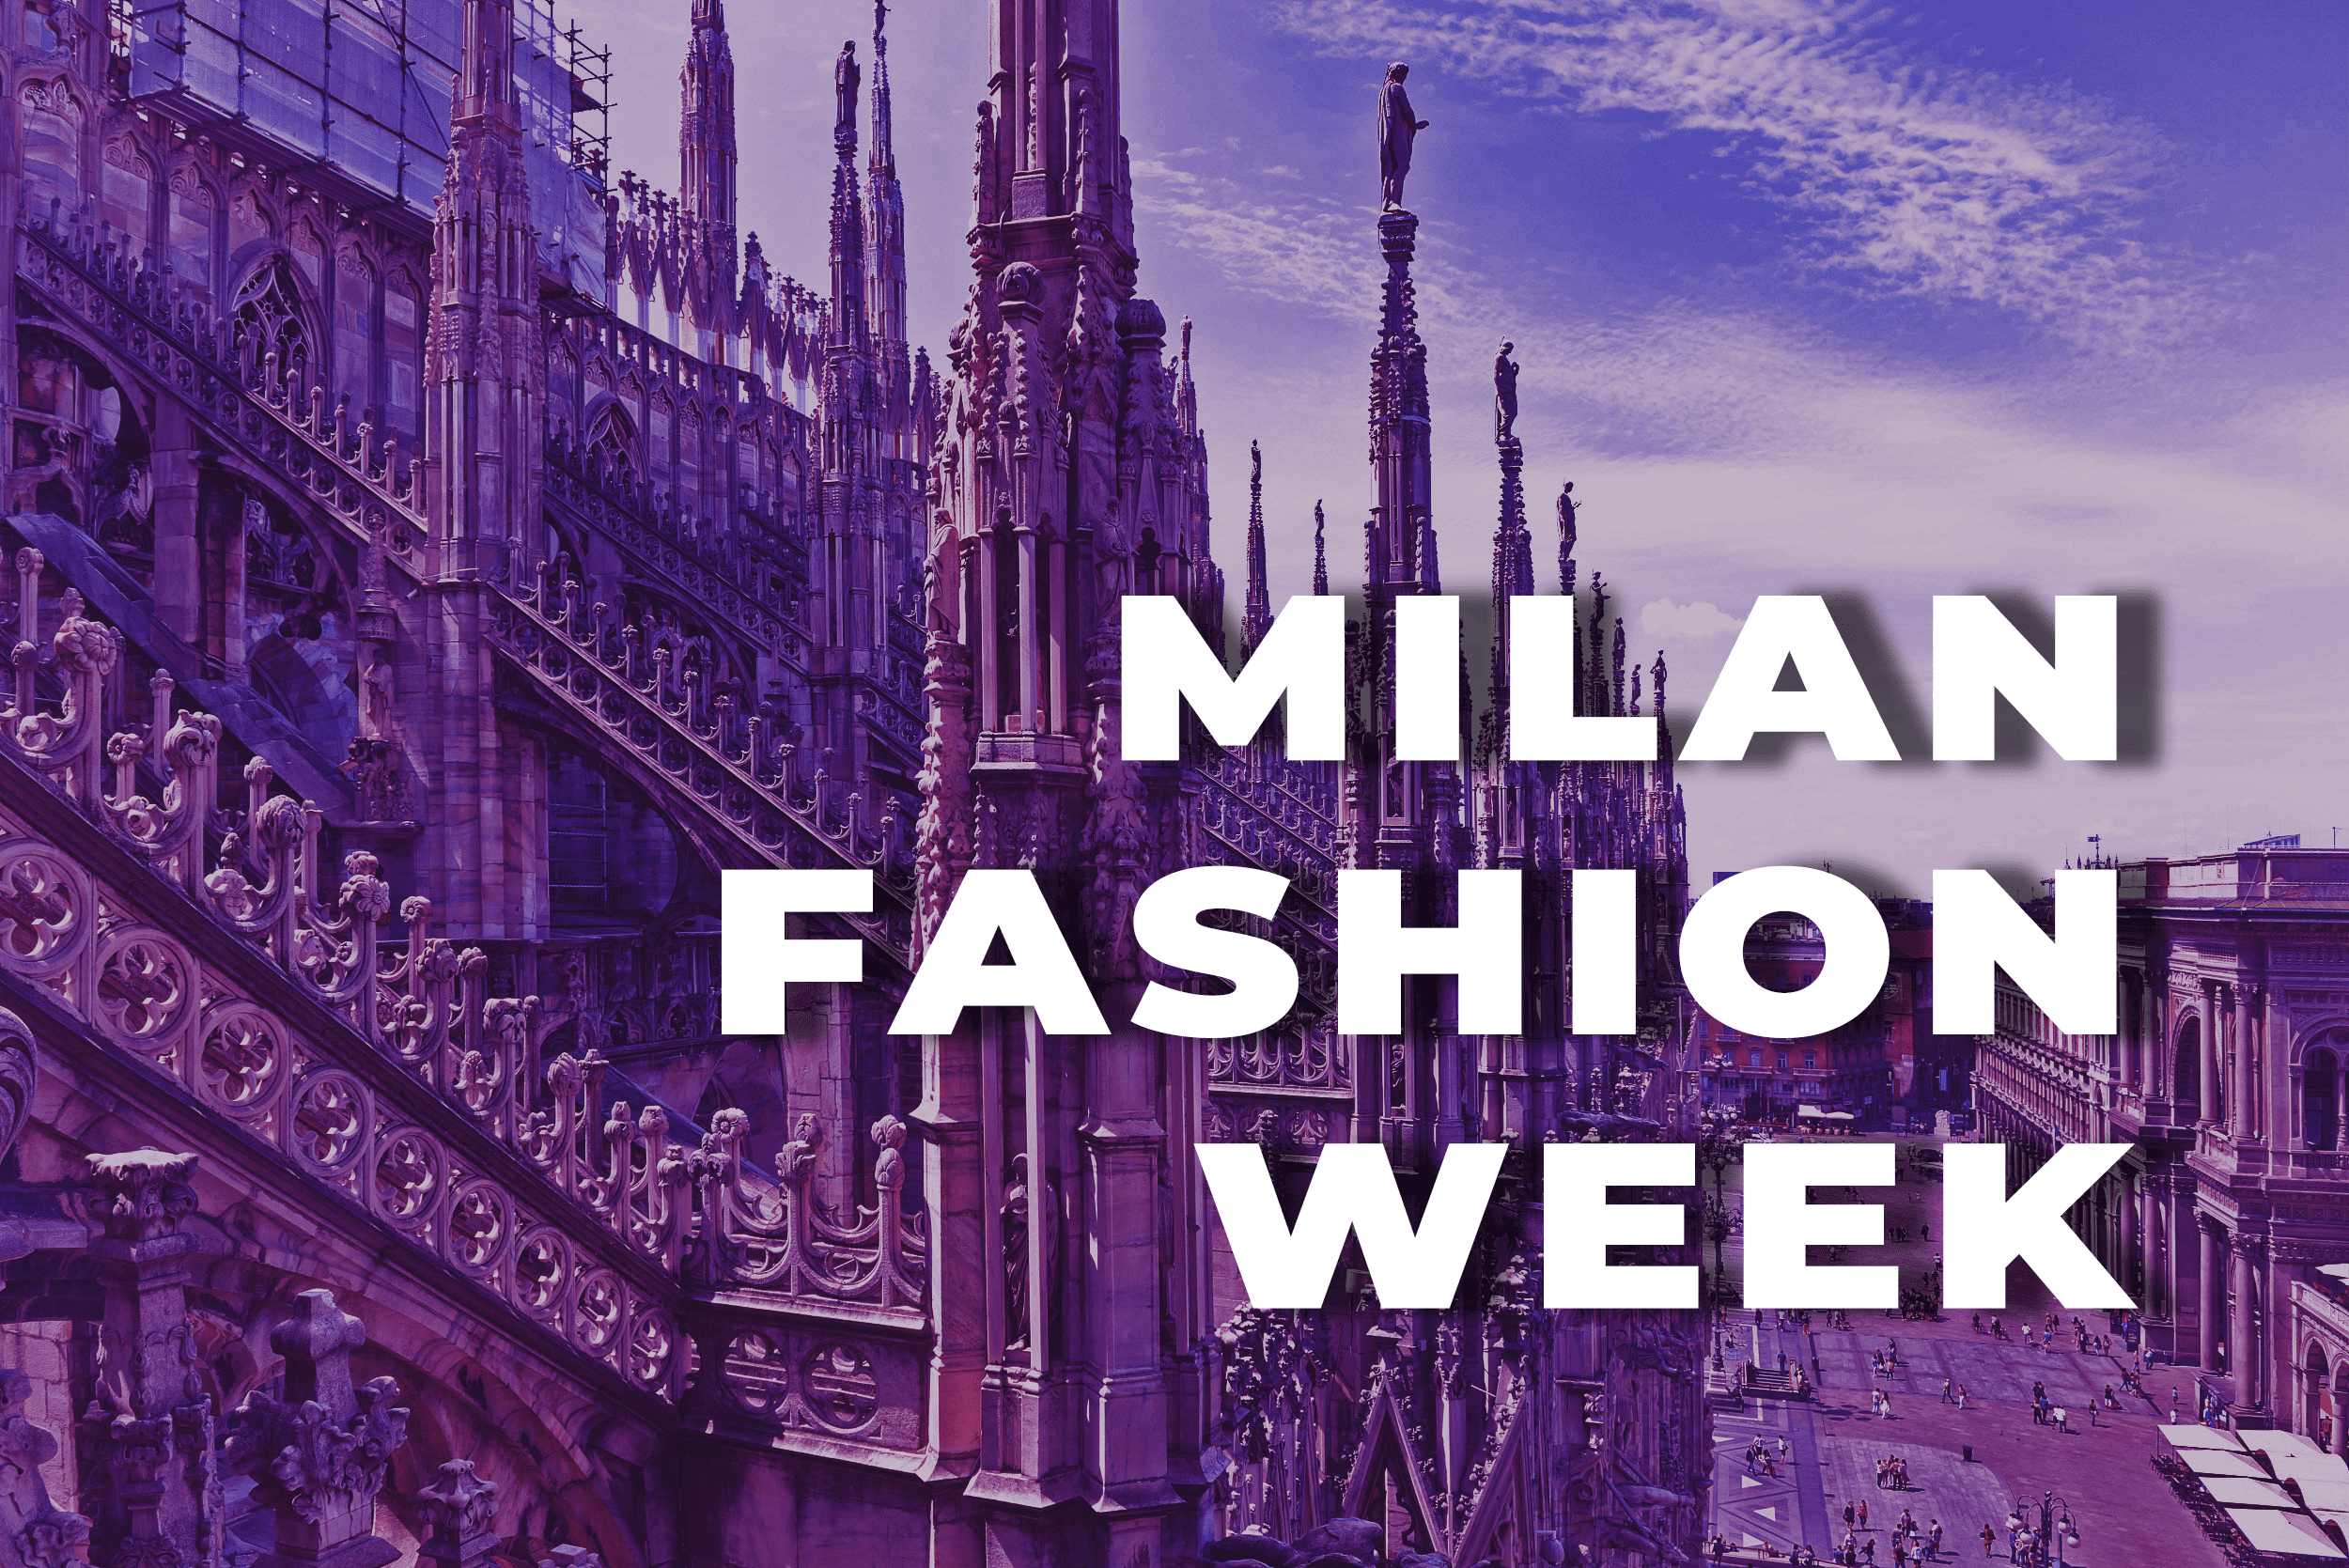 Milan Fashion Week 2022 2023 Dates And Schedule Everything You Need To Know About Digital